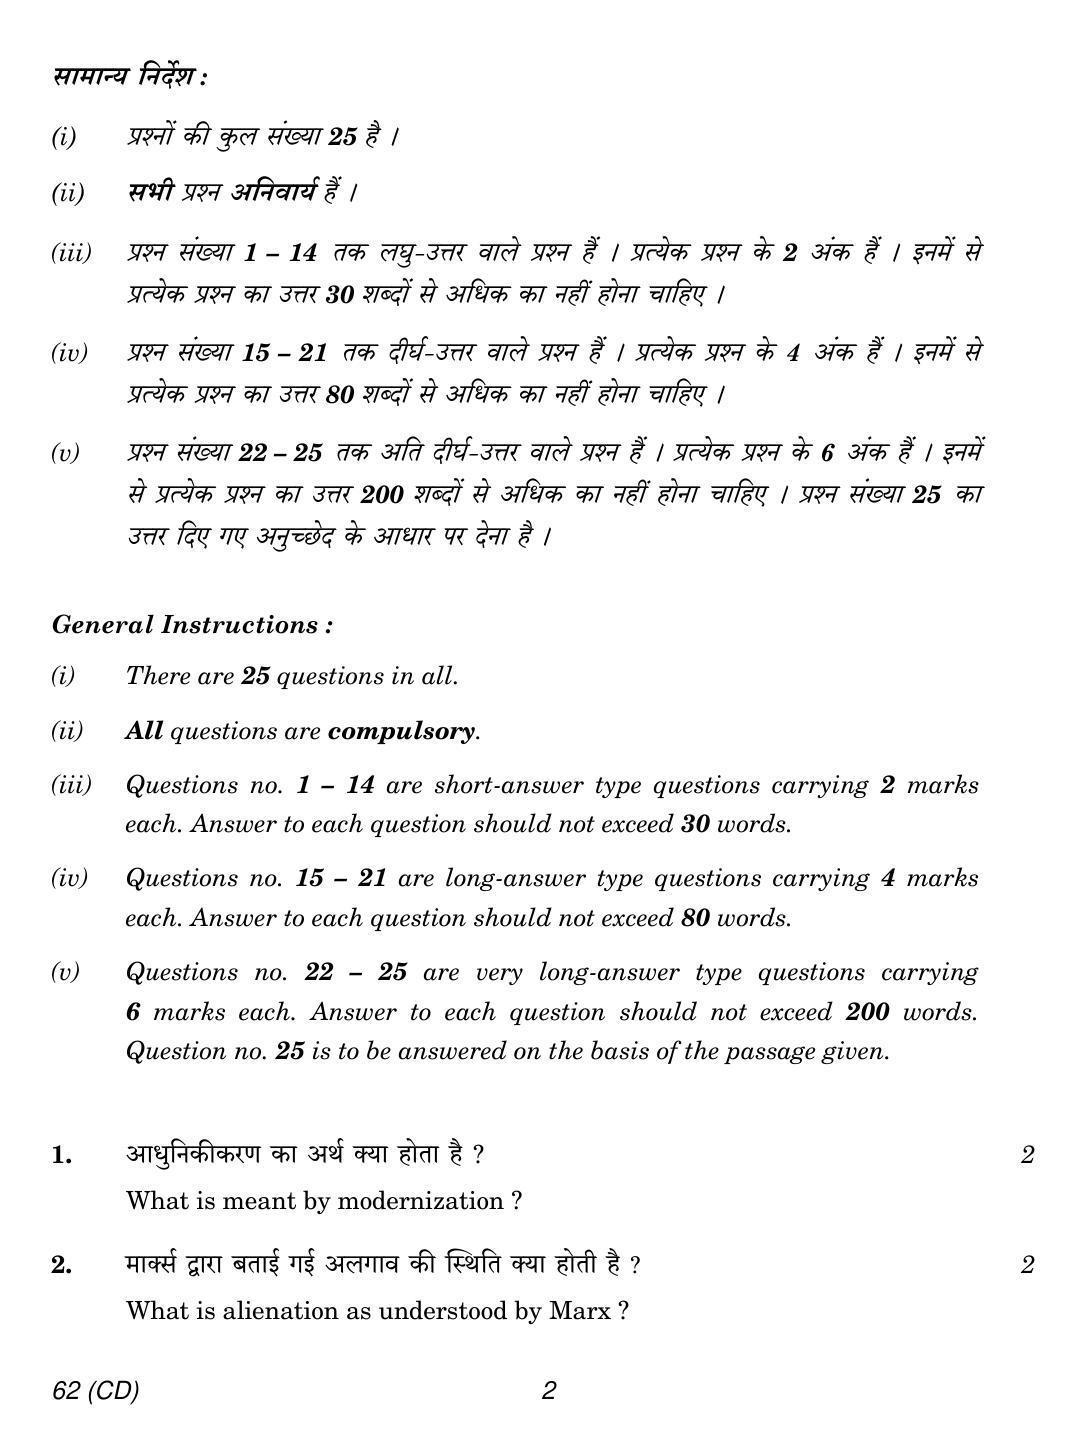 CBSE Class 12 62 SOCIOLOGY CD 2018 Question Paper - Page 2